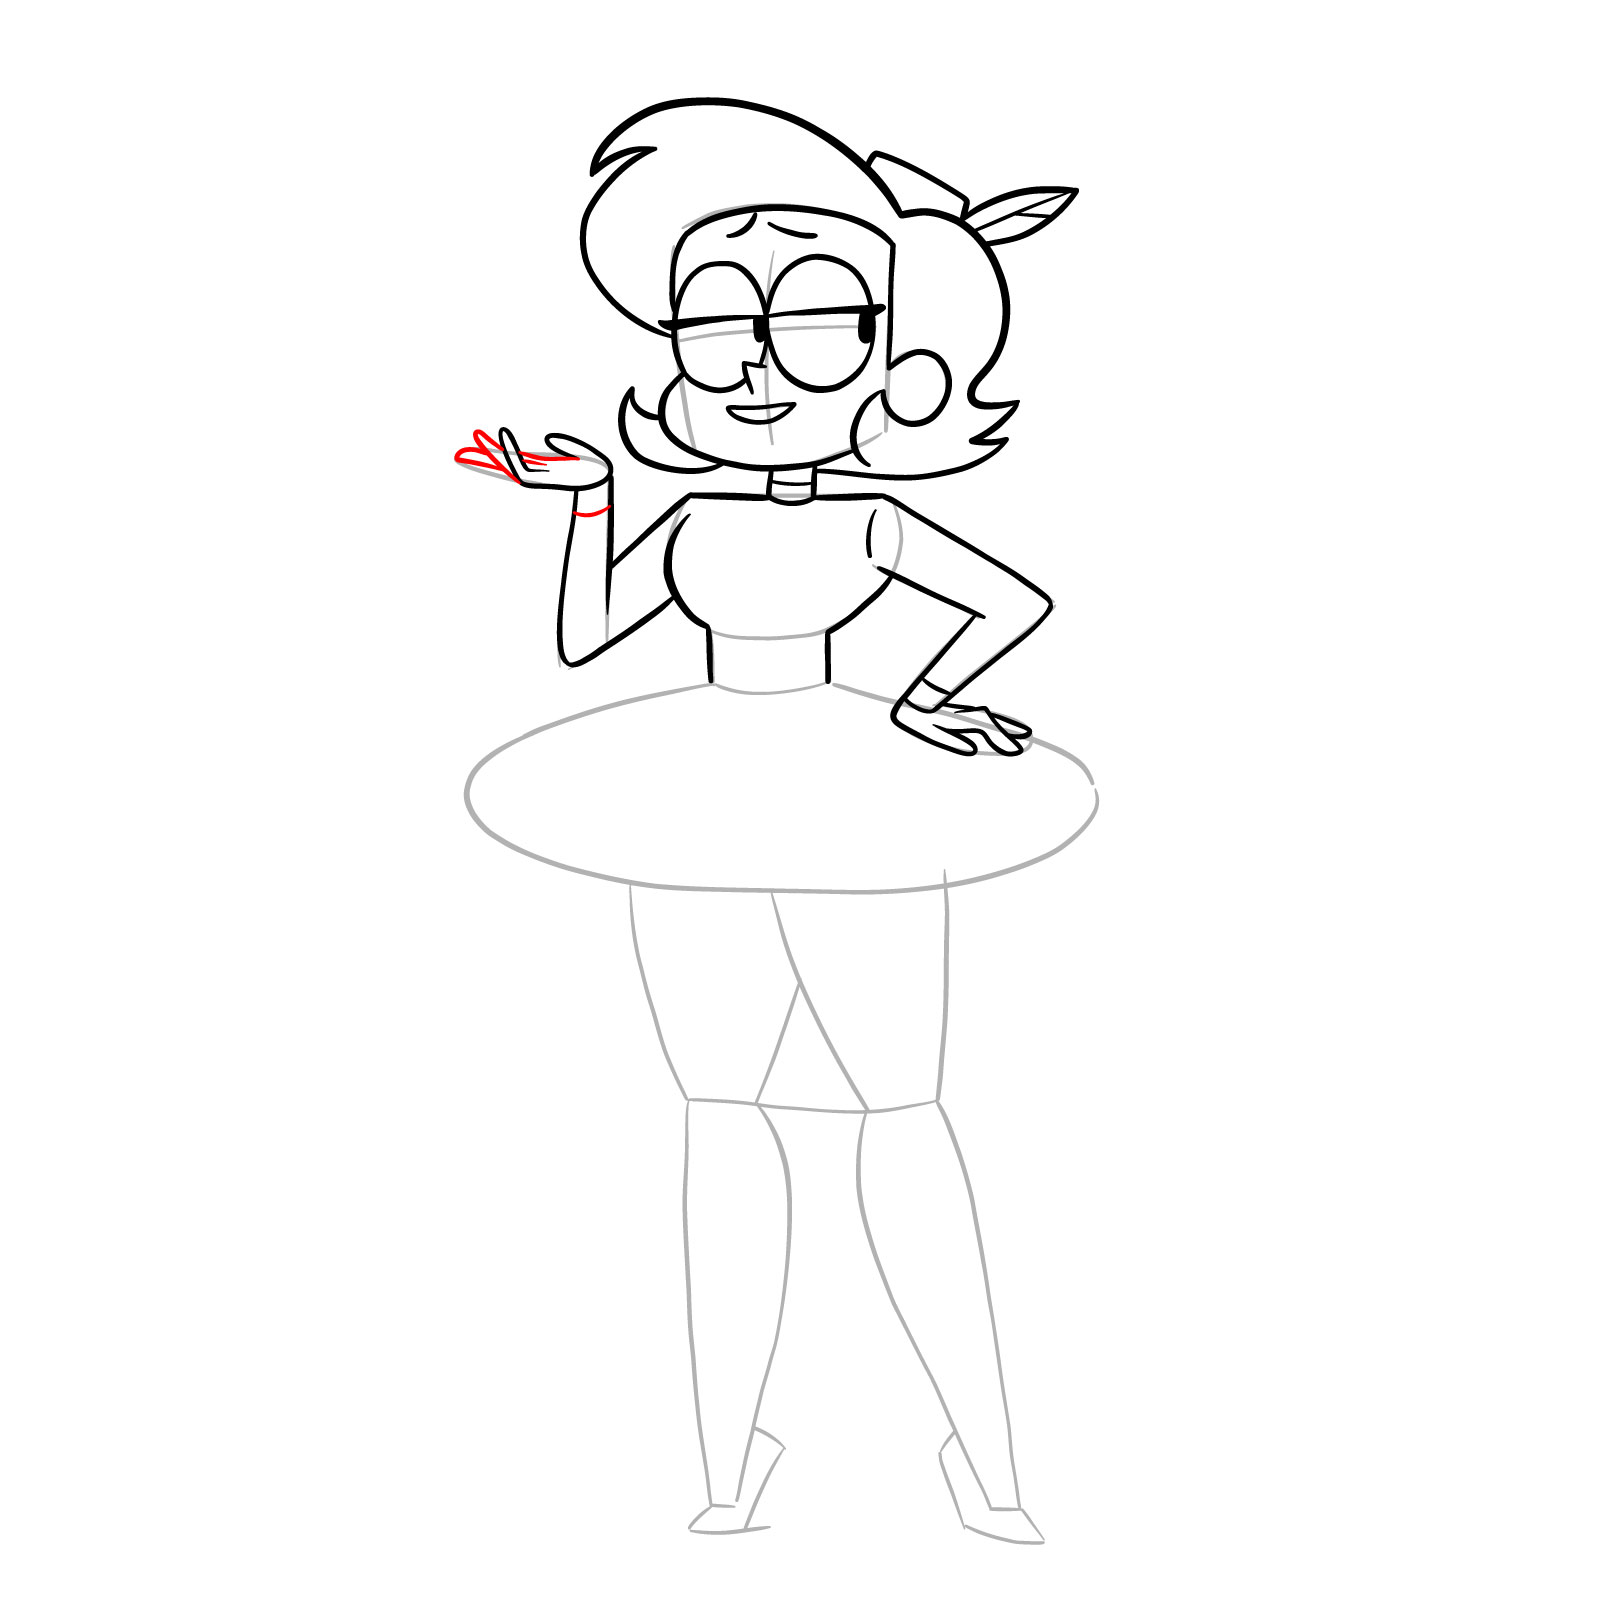 How to draw Elodie from OK K.O.! - step 24